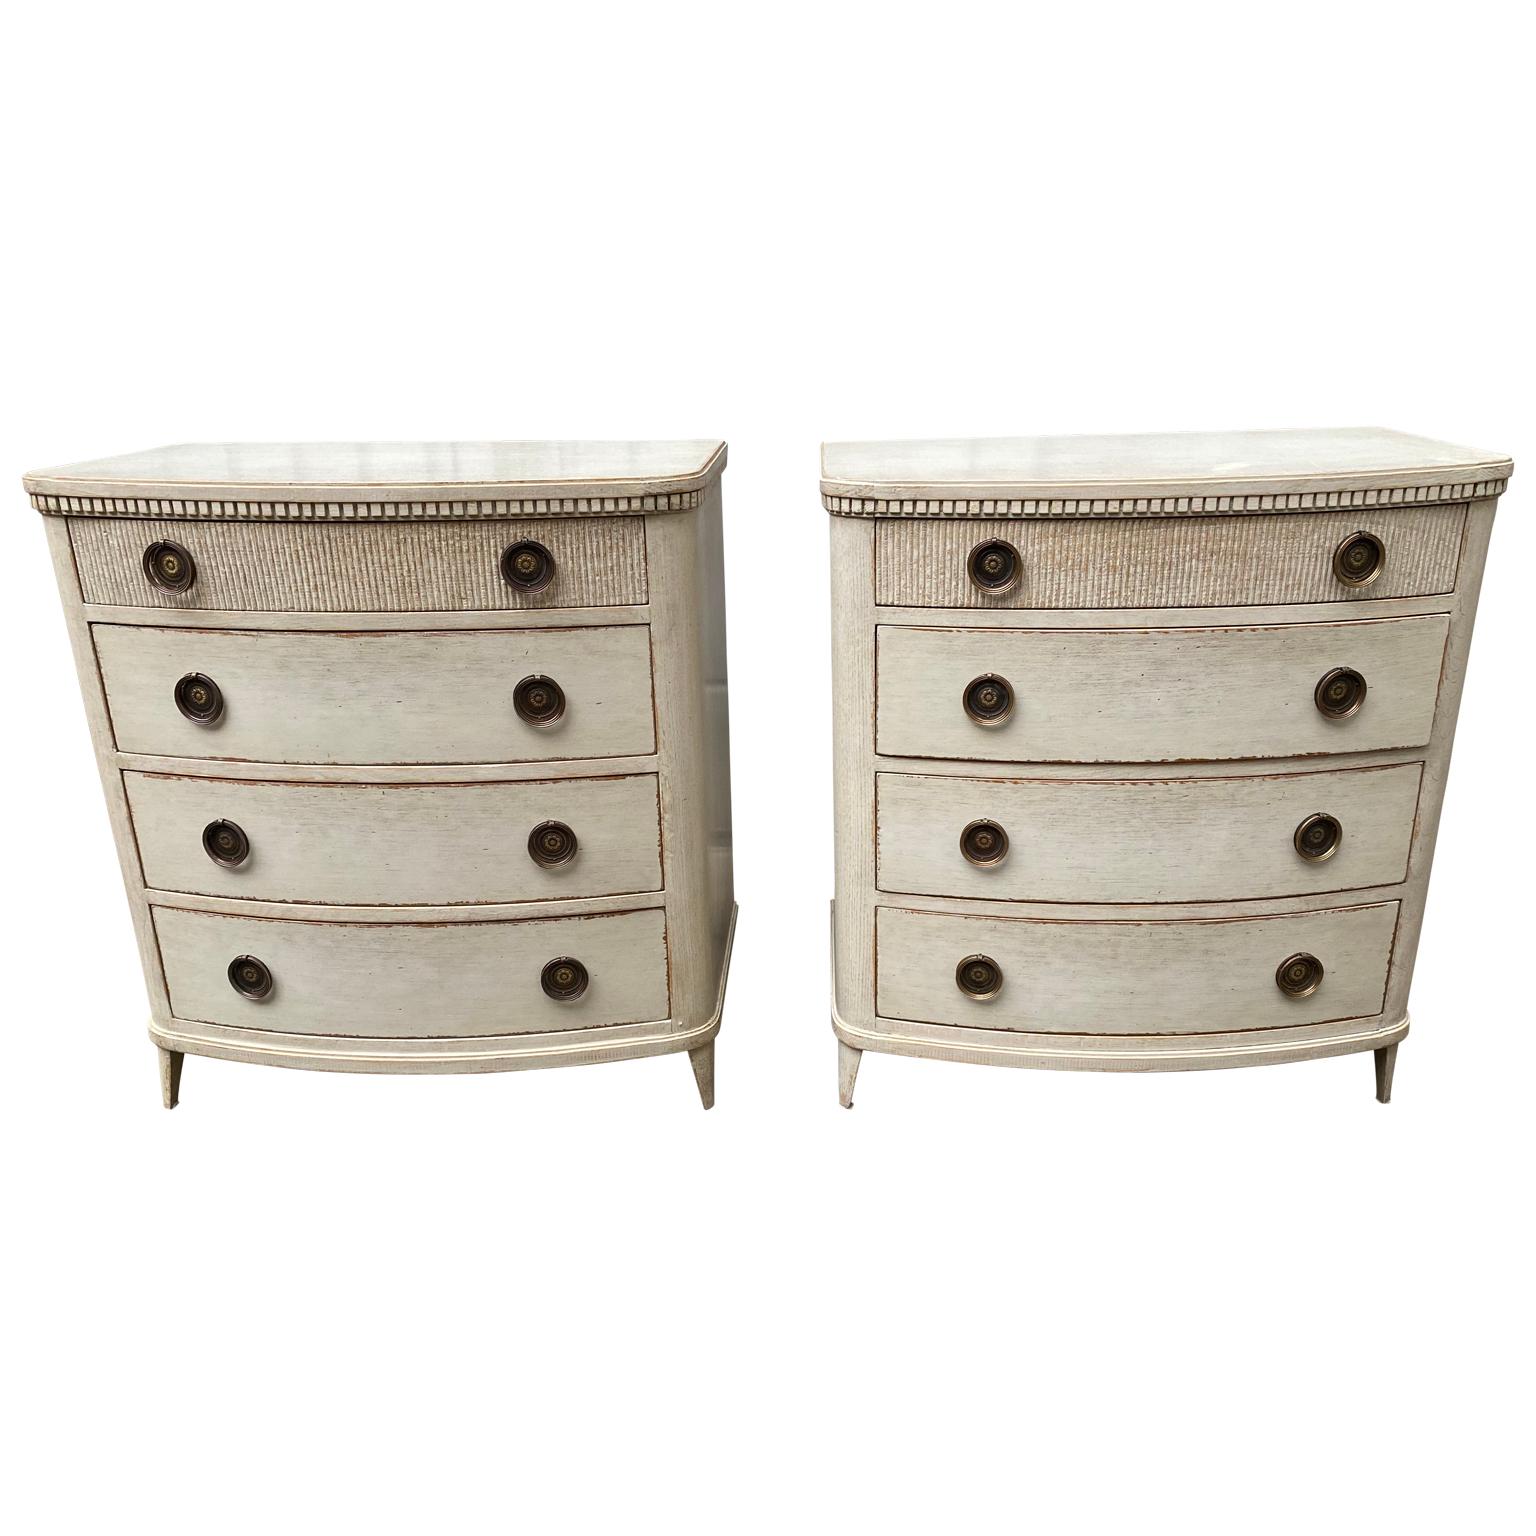 Pair of Scandinavian 19th century painted four-drawer commodes with brass hardware.